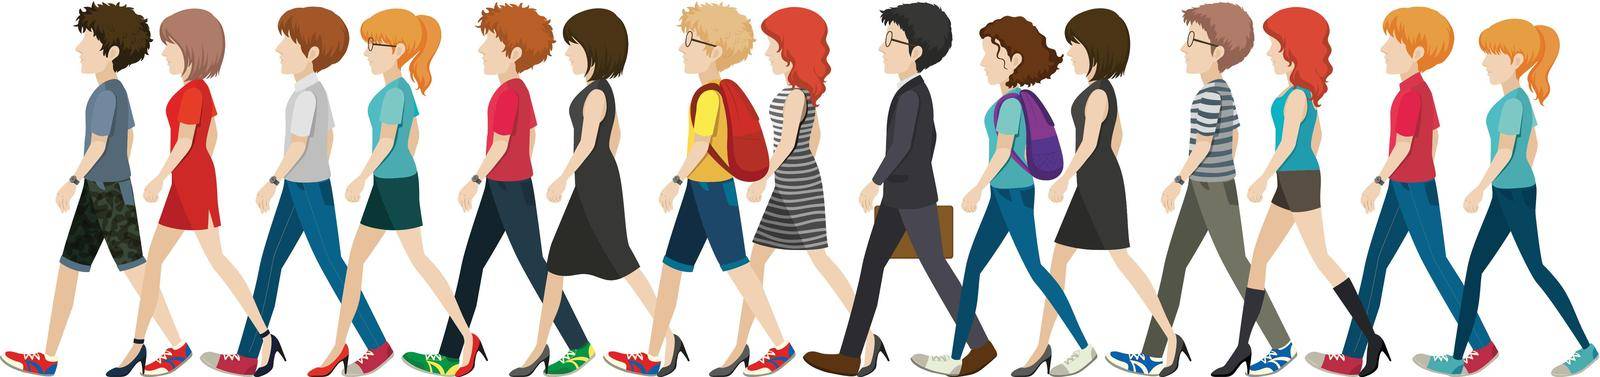 A group of faceless people walking in line by iimages